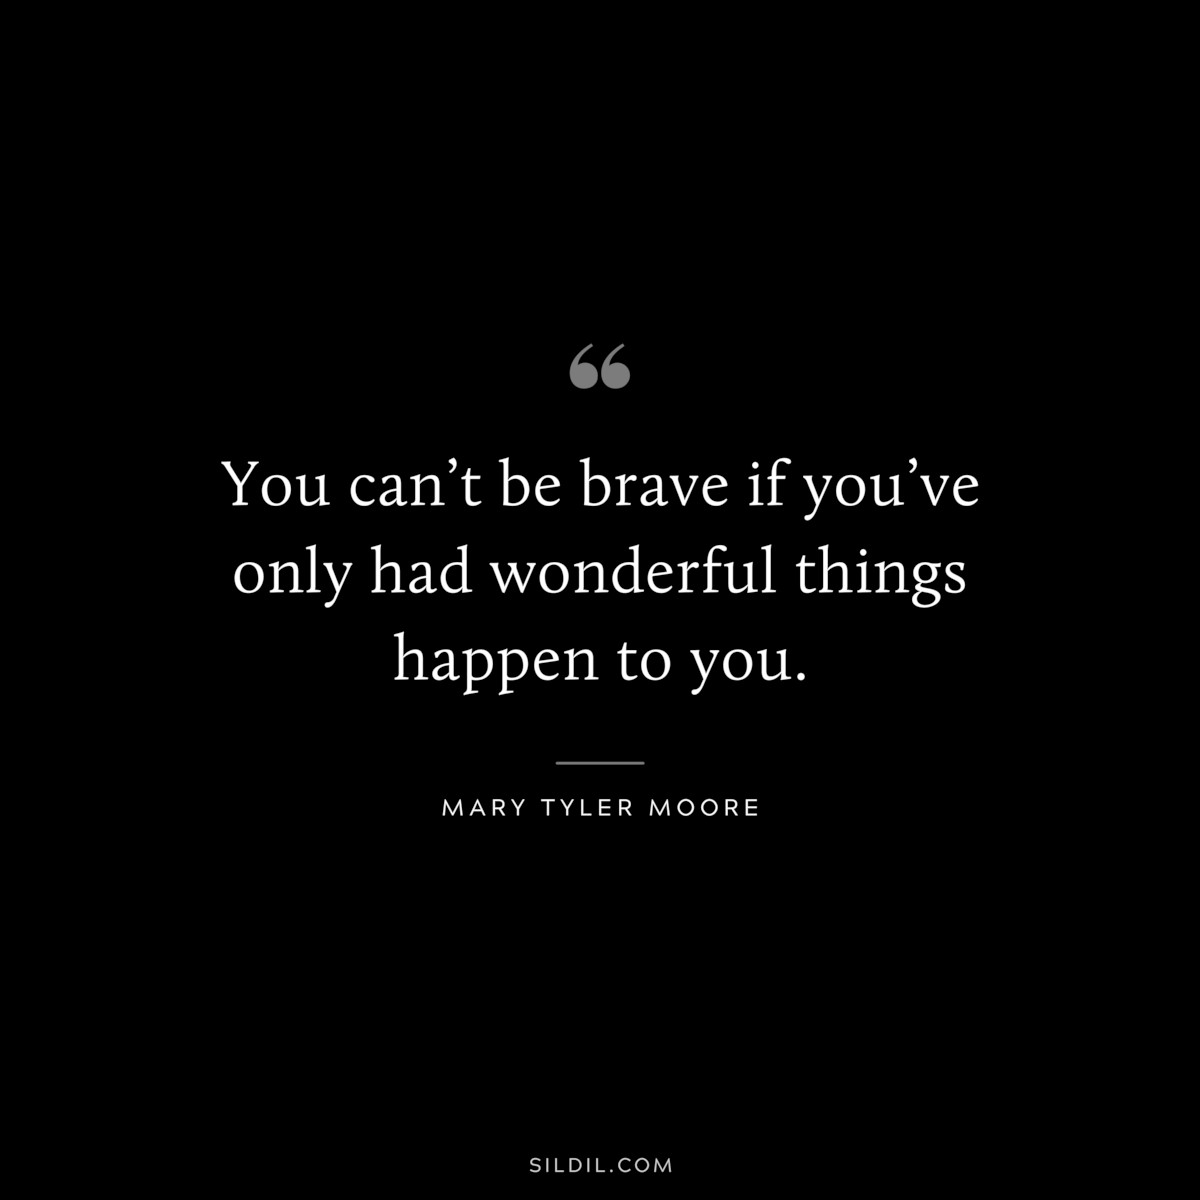 You can’t be brave if you’ve only had wonderful things happen to you. ― Mary Tyler Moore